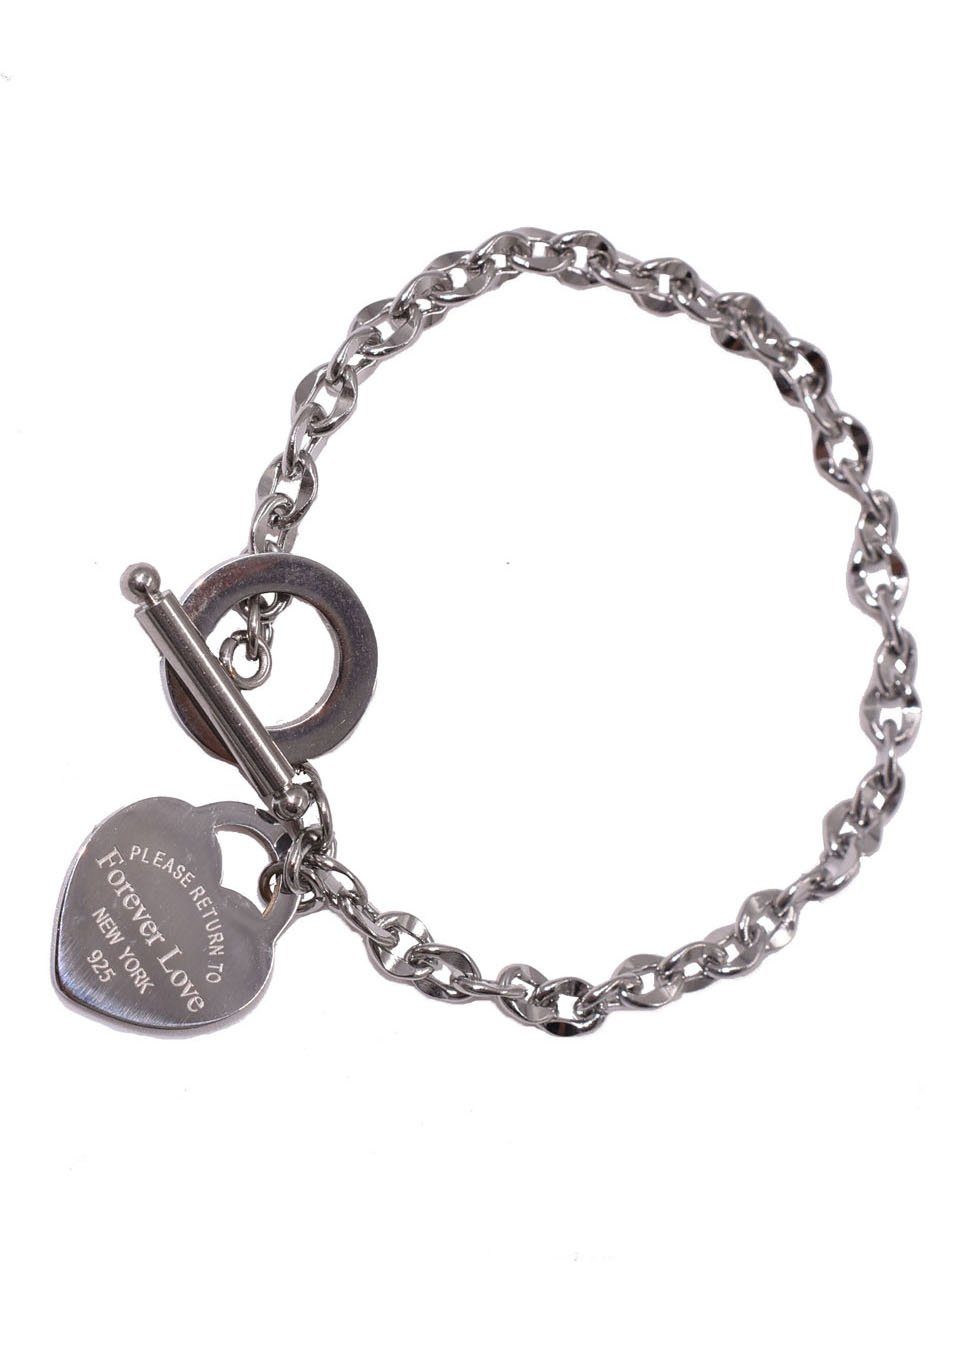 Firetti Armband »Herz mit fester Gravur "PLEASE RETURN TO Forever Love"«,  Made in Germany online kaufen | OTTO